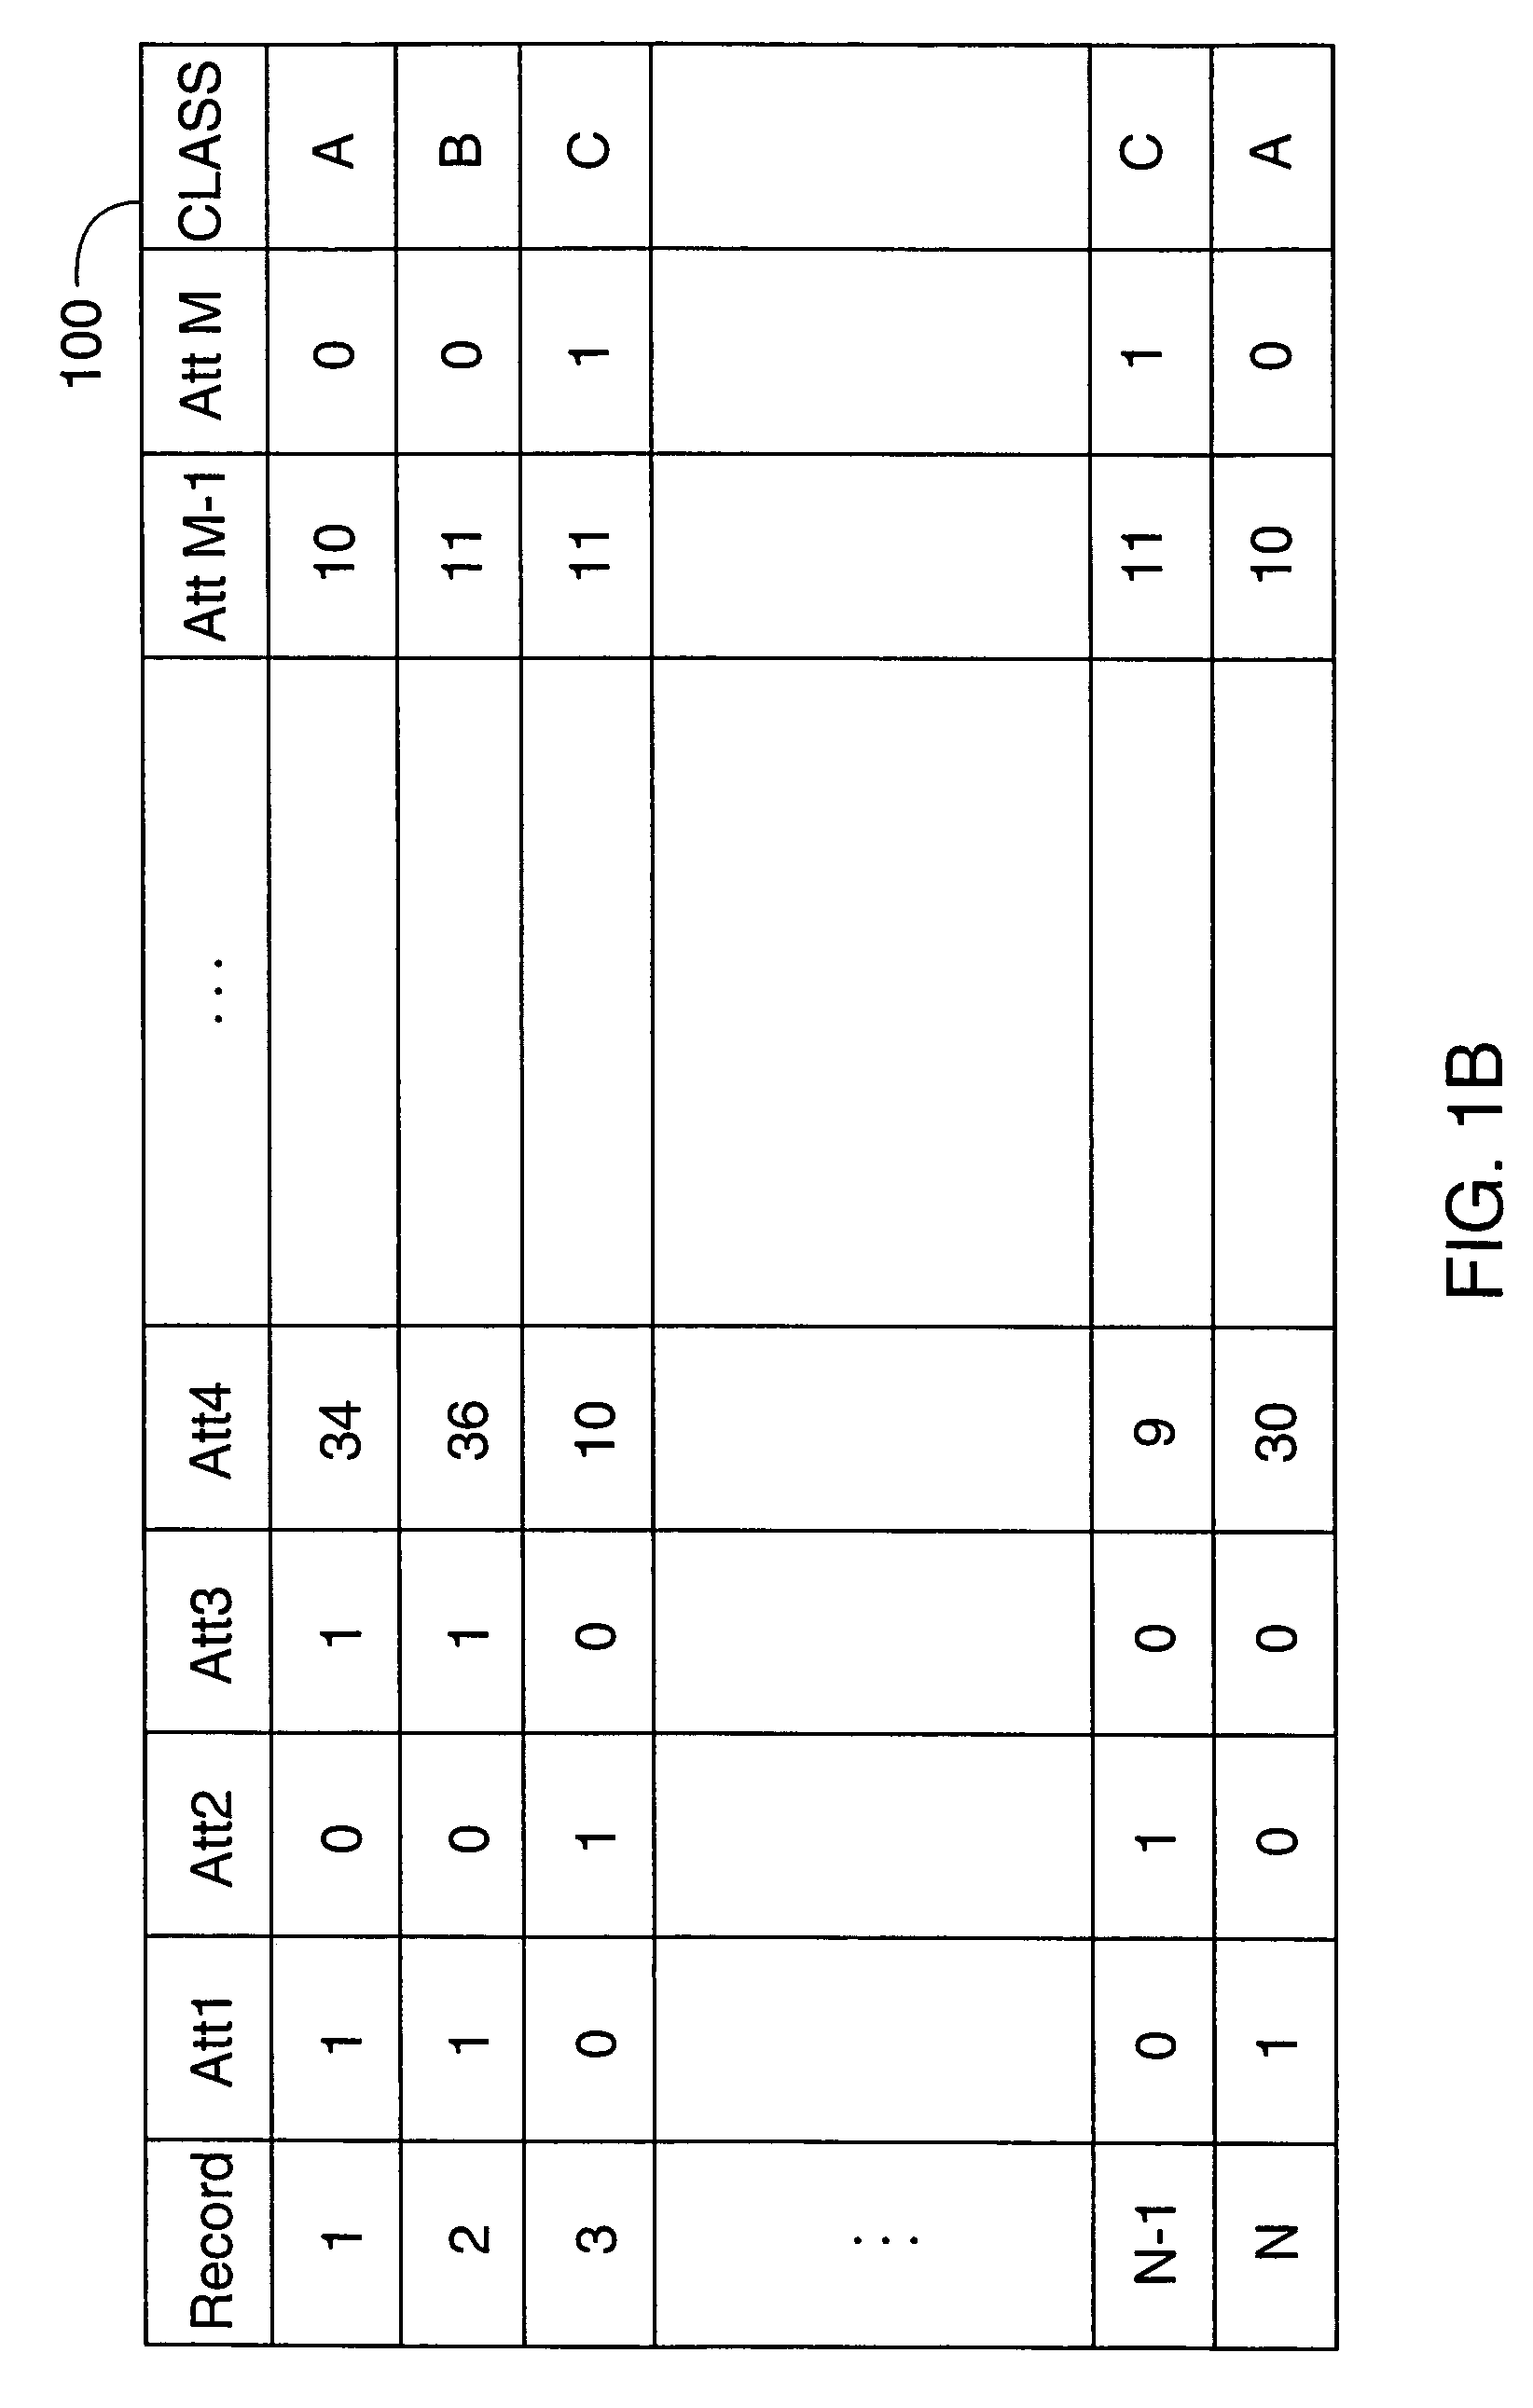 Apparatus and accompanying methods for visualizing clusters of data and hierarchical cluster classifications